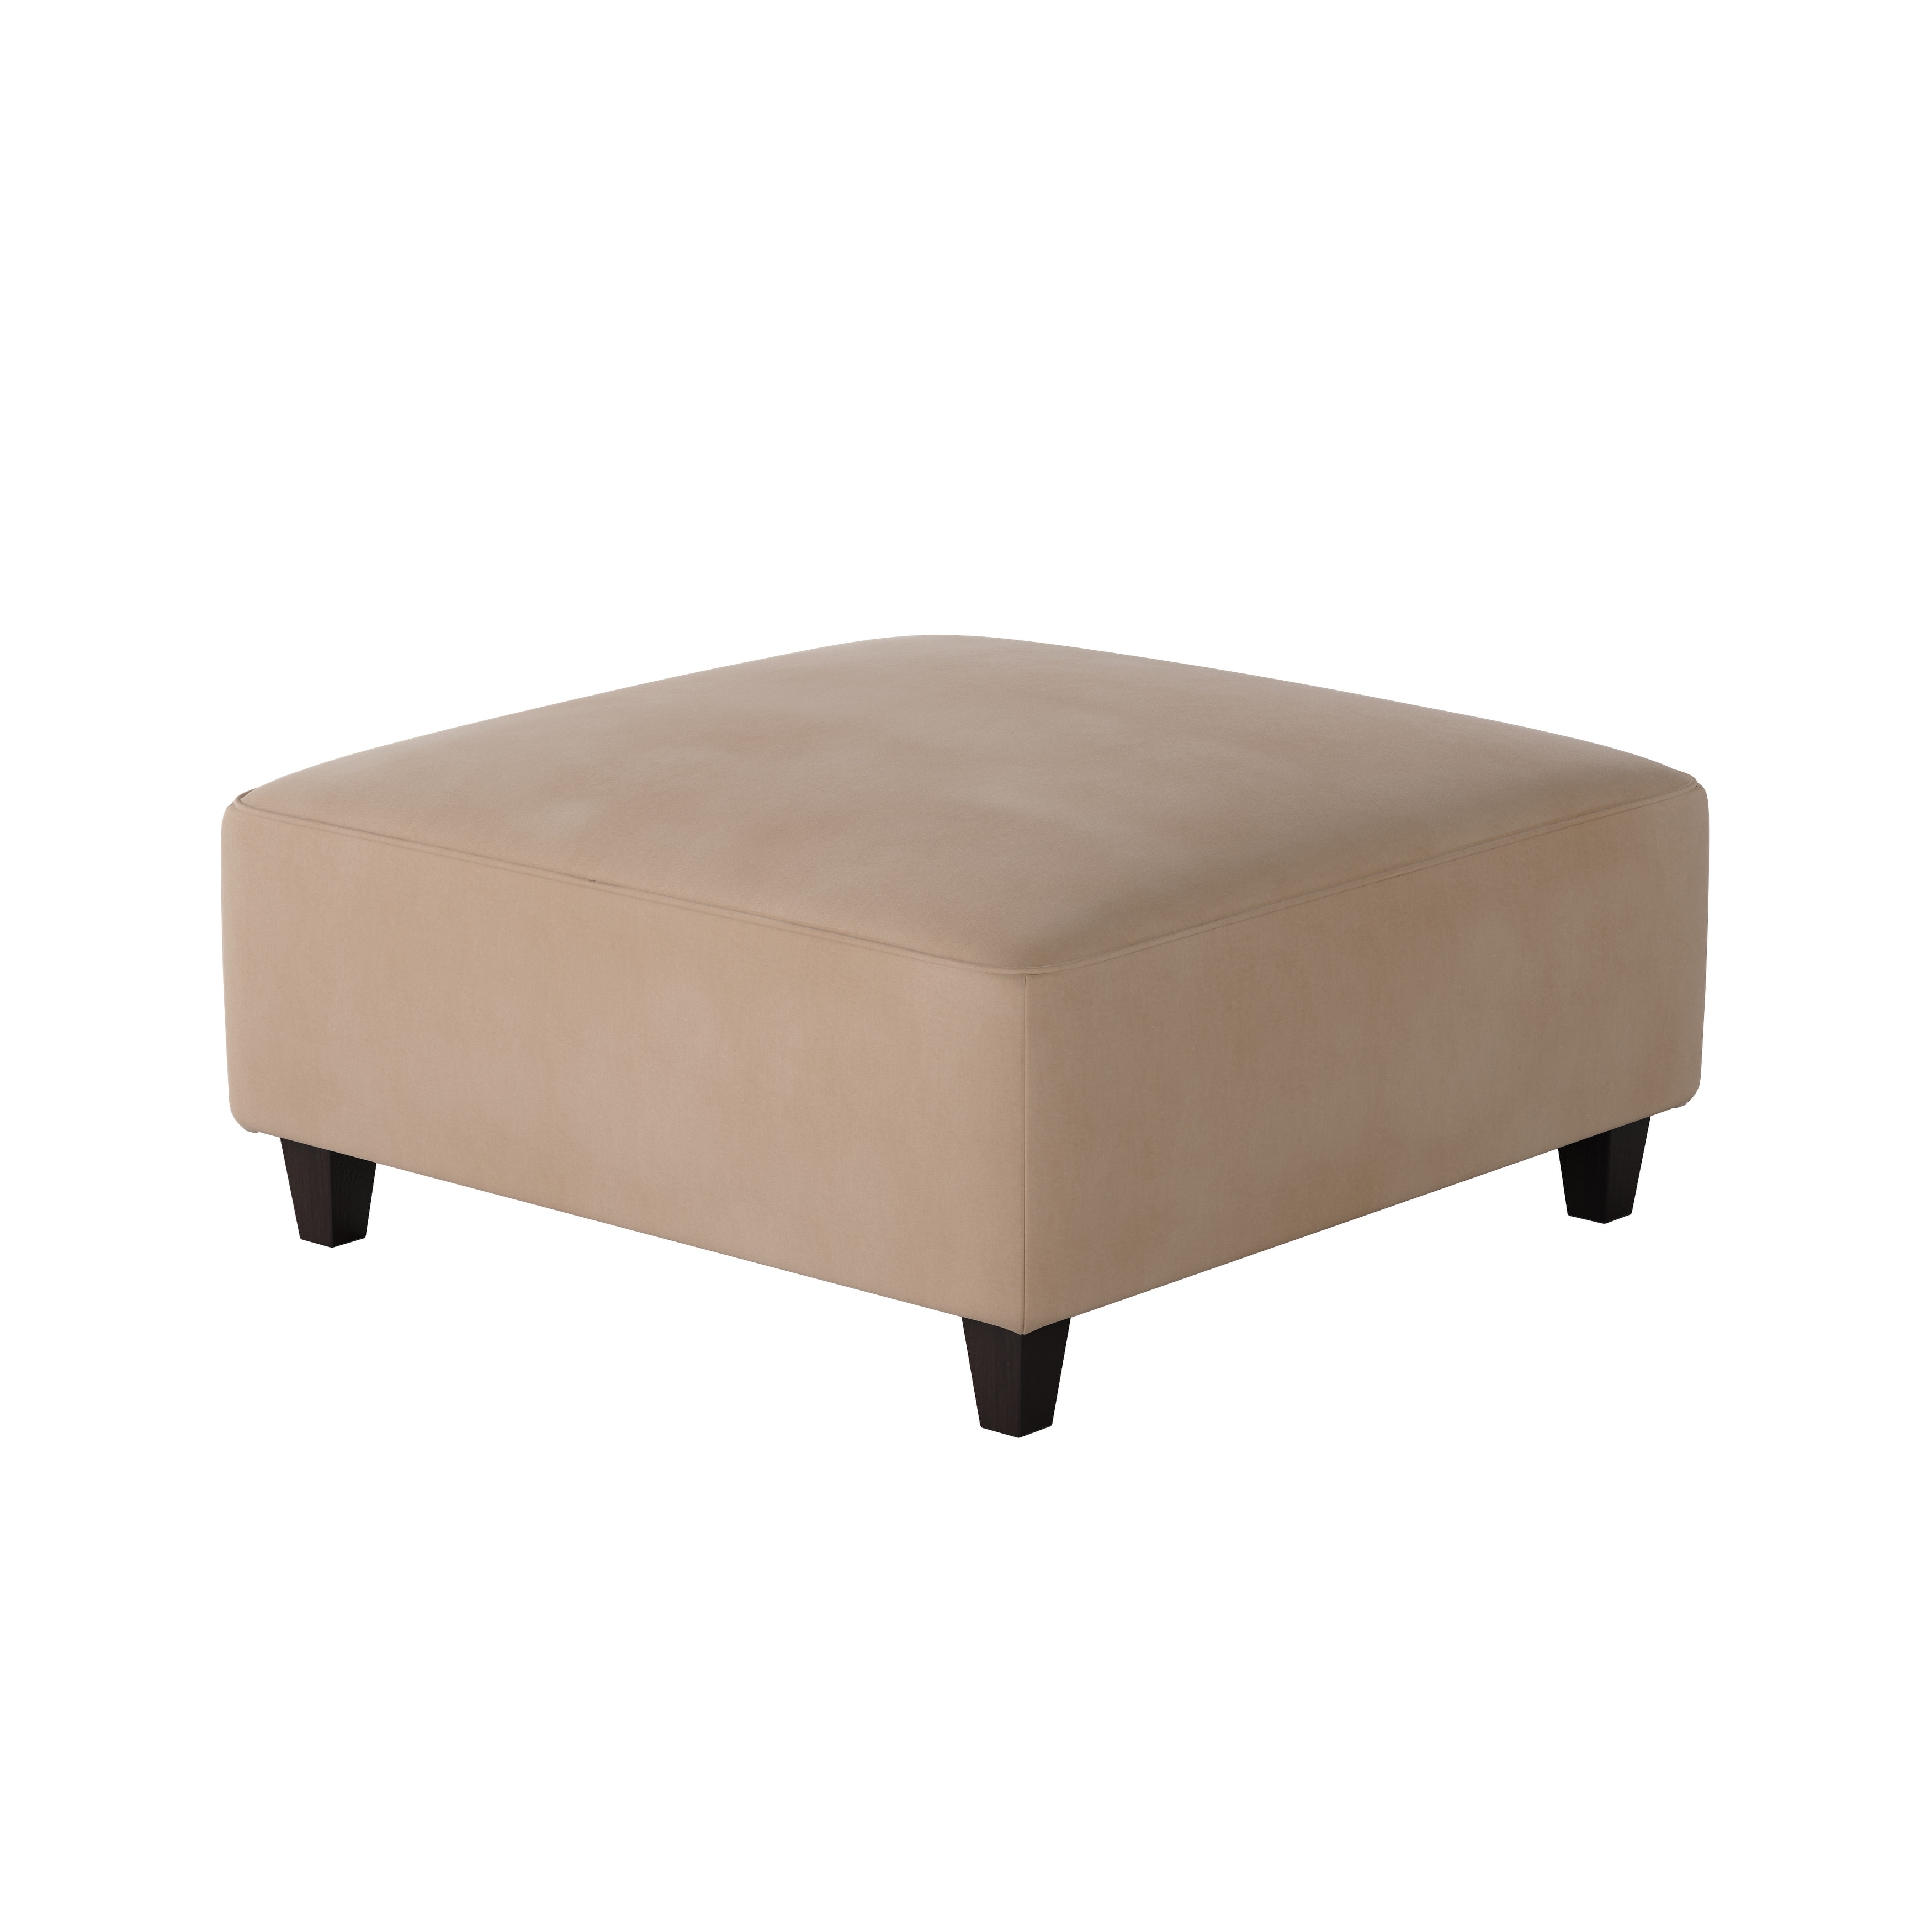 Southern Home Furnishings Bella Blush 38 inch Square Cocktail Ottoman